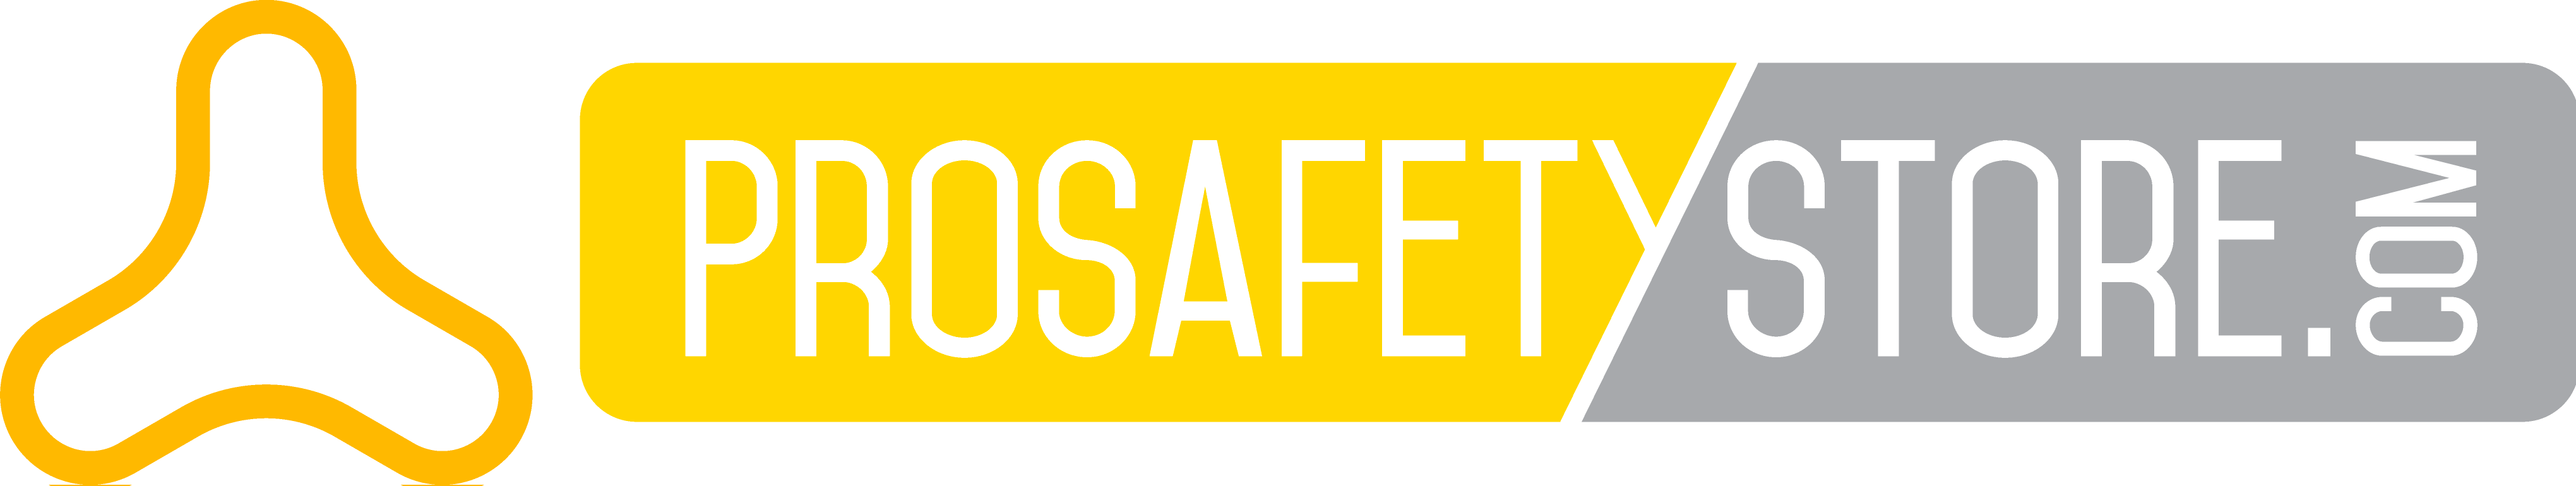 A yellow and gray logo for prosafety store.